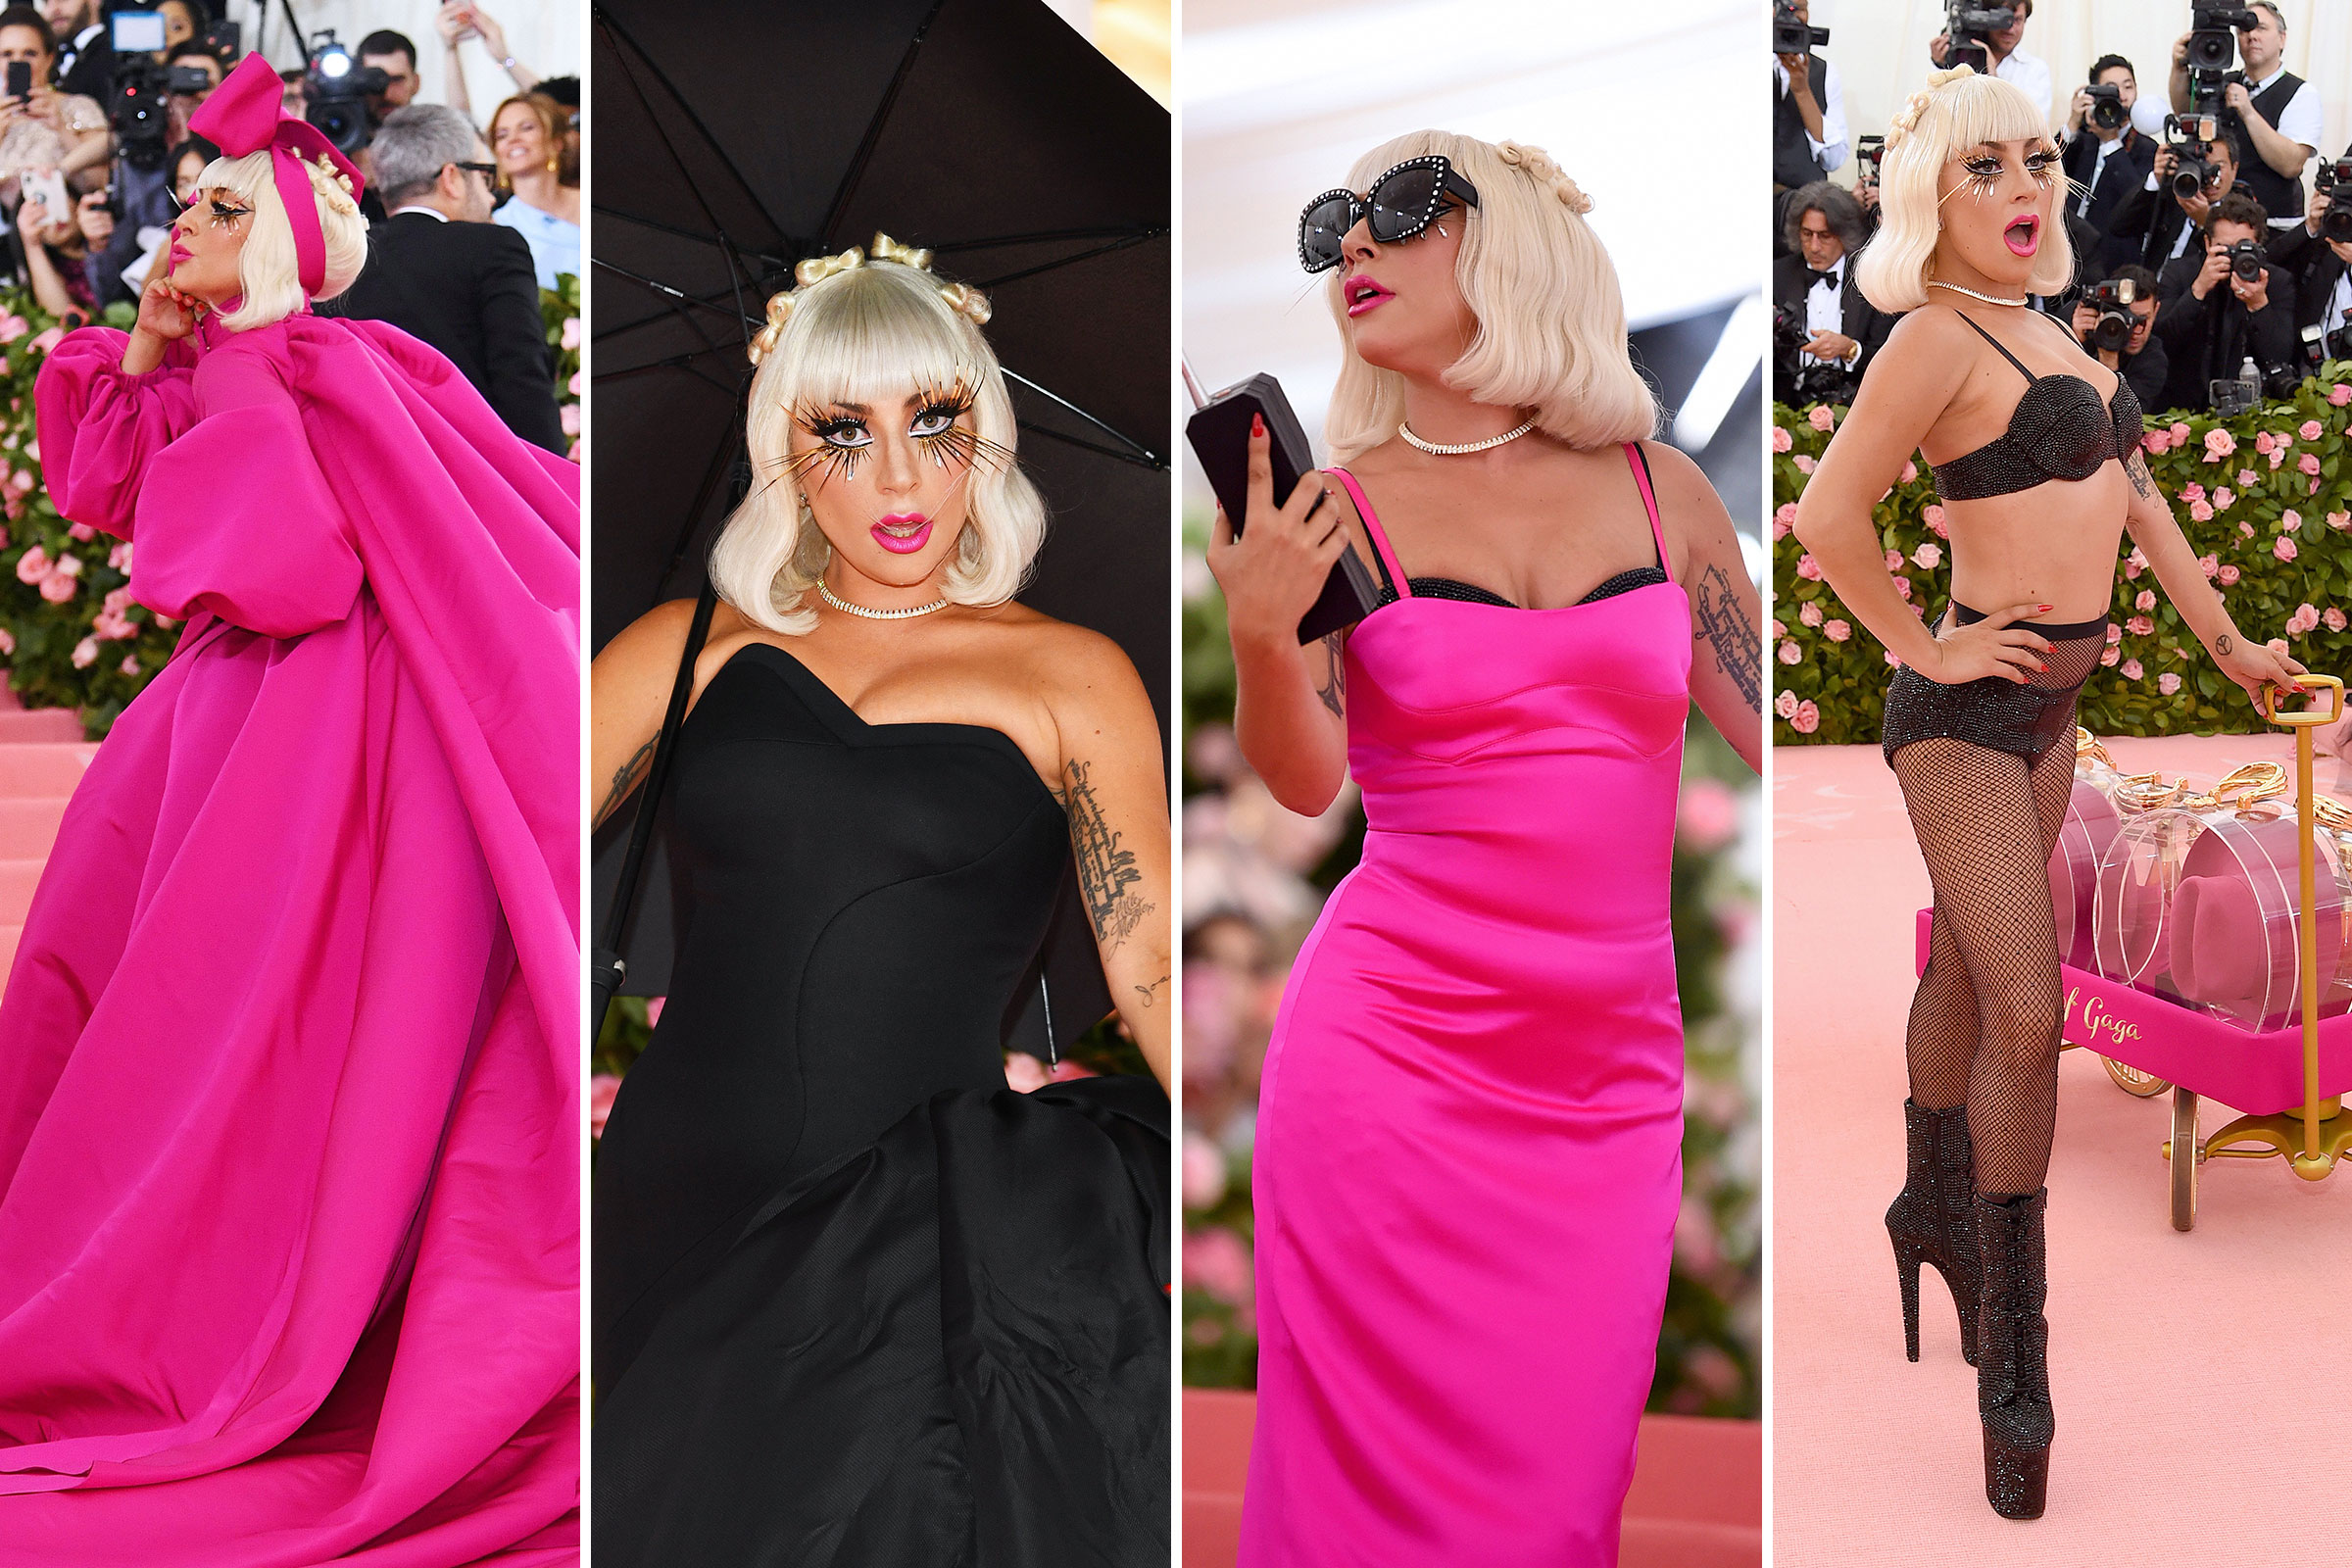 Lady Gaga attends The 2019 Met Gala Celebrating Camp: Notes on Fashion at Metropolitan Museum of Art in New York City on May 06, 2019. (Getty)